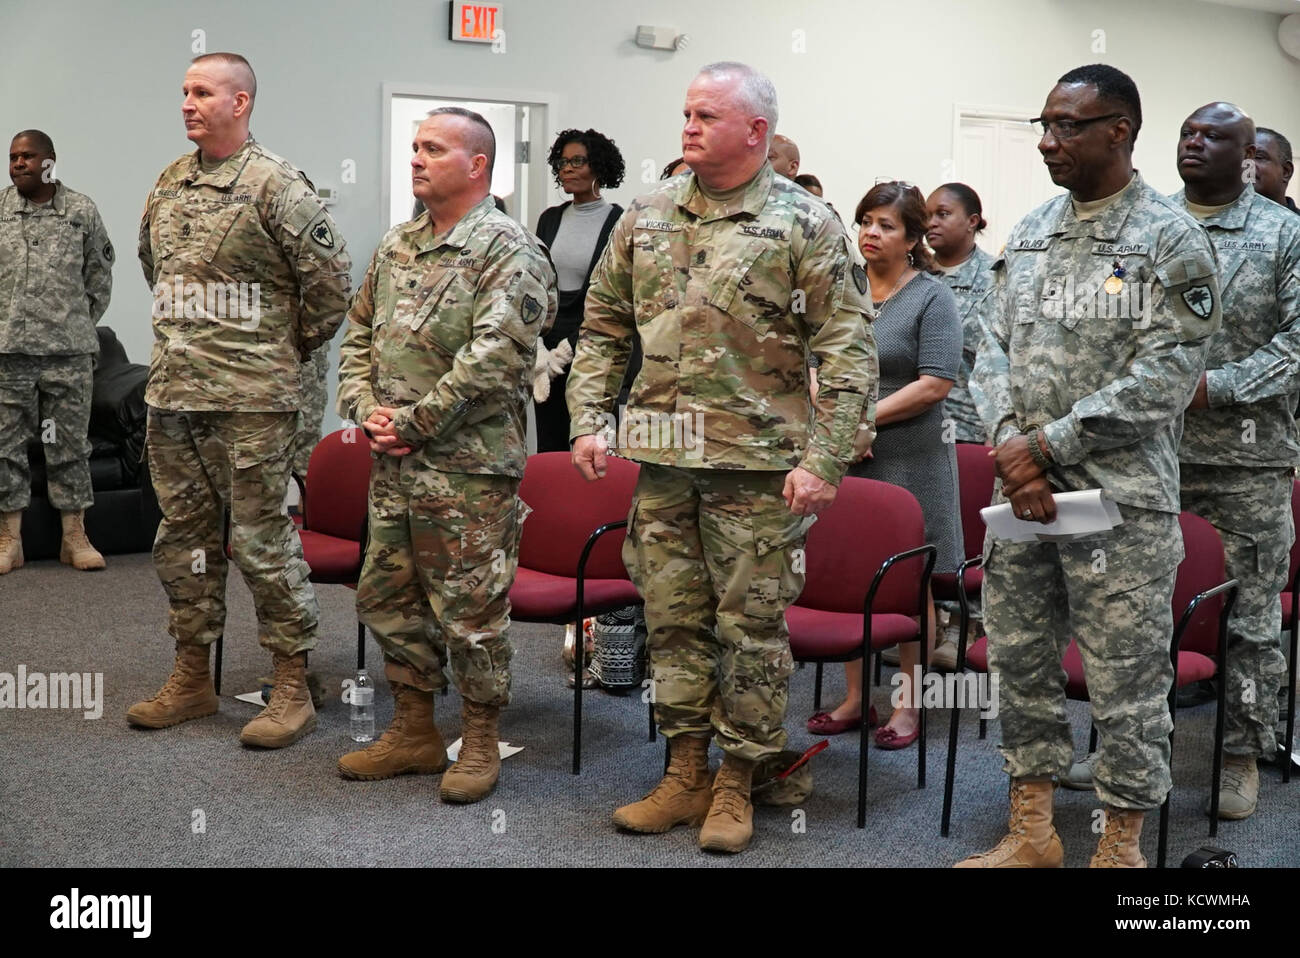 The South Carolina National Guard recognizes Master Sgt. Theodore Wilder’s 37 years of service during a retirement ceremony at McCrady Training Center in Eastover, South Carolina, March 9, 2017. Stock Photo